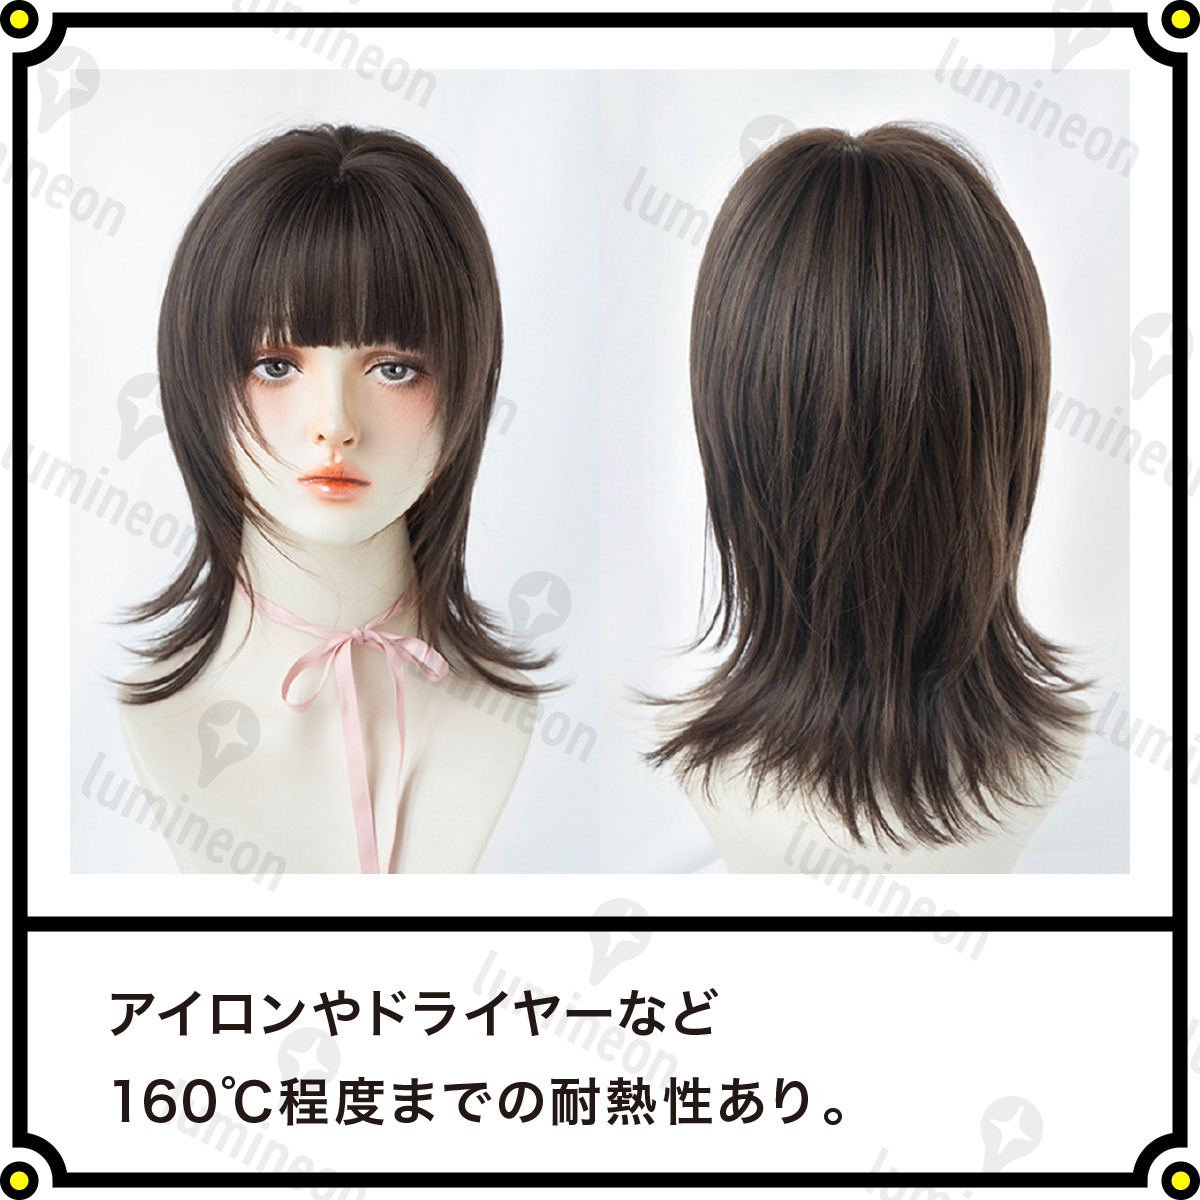  wig full Wolf cut Short front . Bob Brown ek stereo tea . for women lady's nature stylish for cheap small face cosplay g200 3